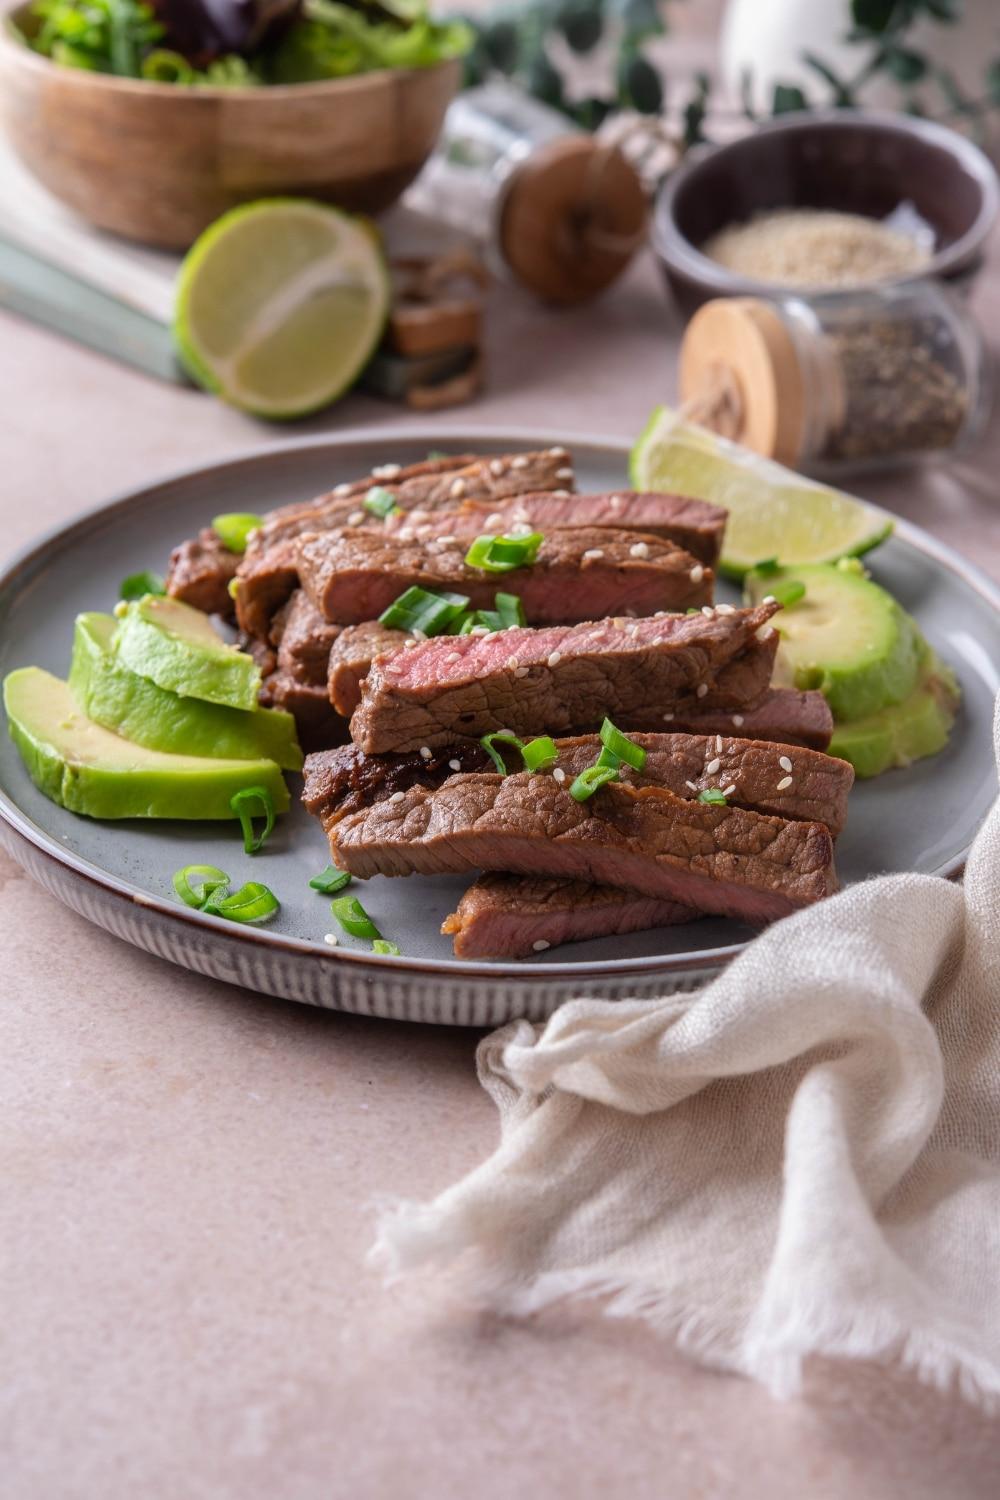 Sliced sirloin tip steak on a plate served with avocado slices and garnished with lime wedges and chopped green onion.